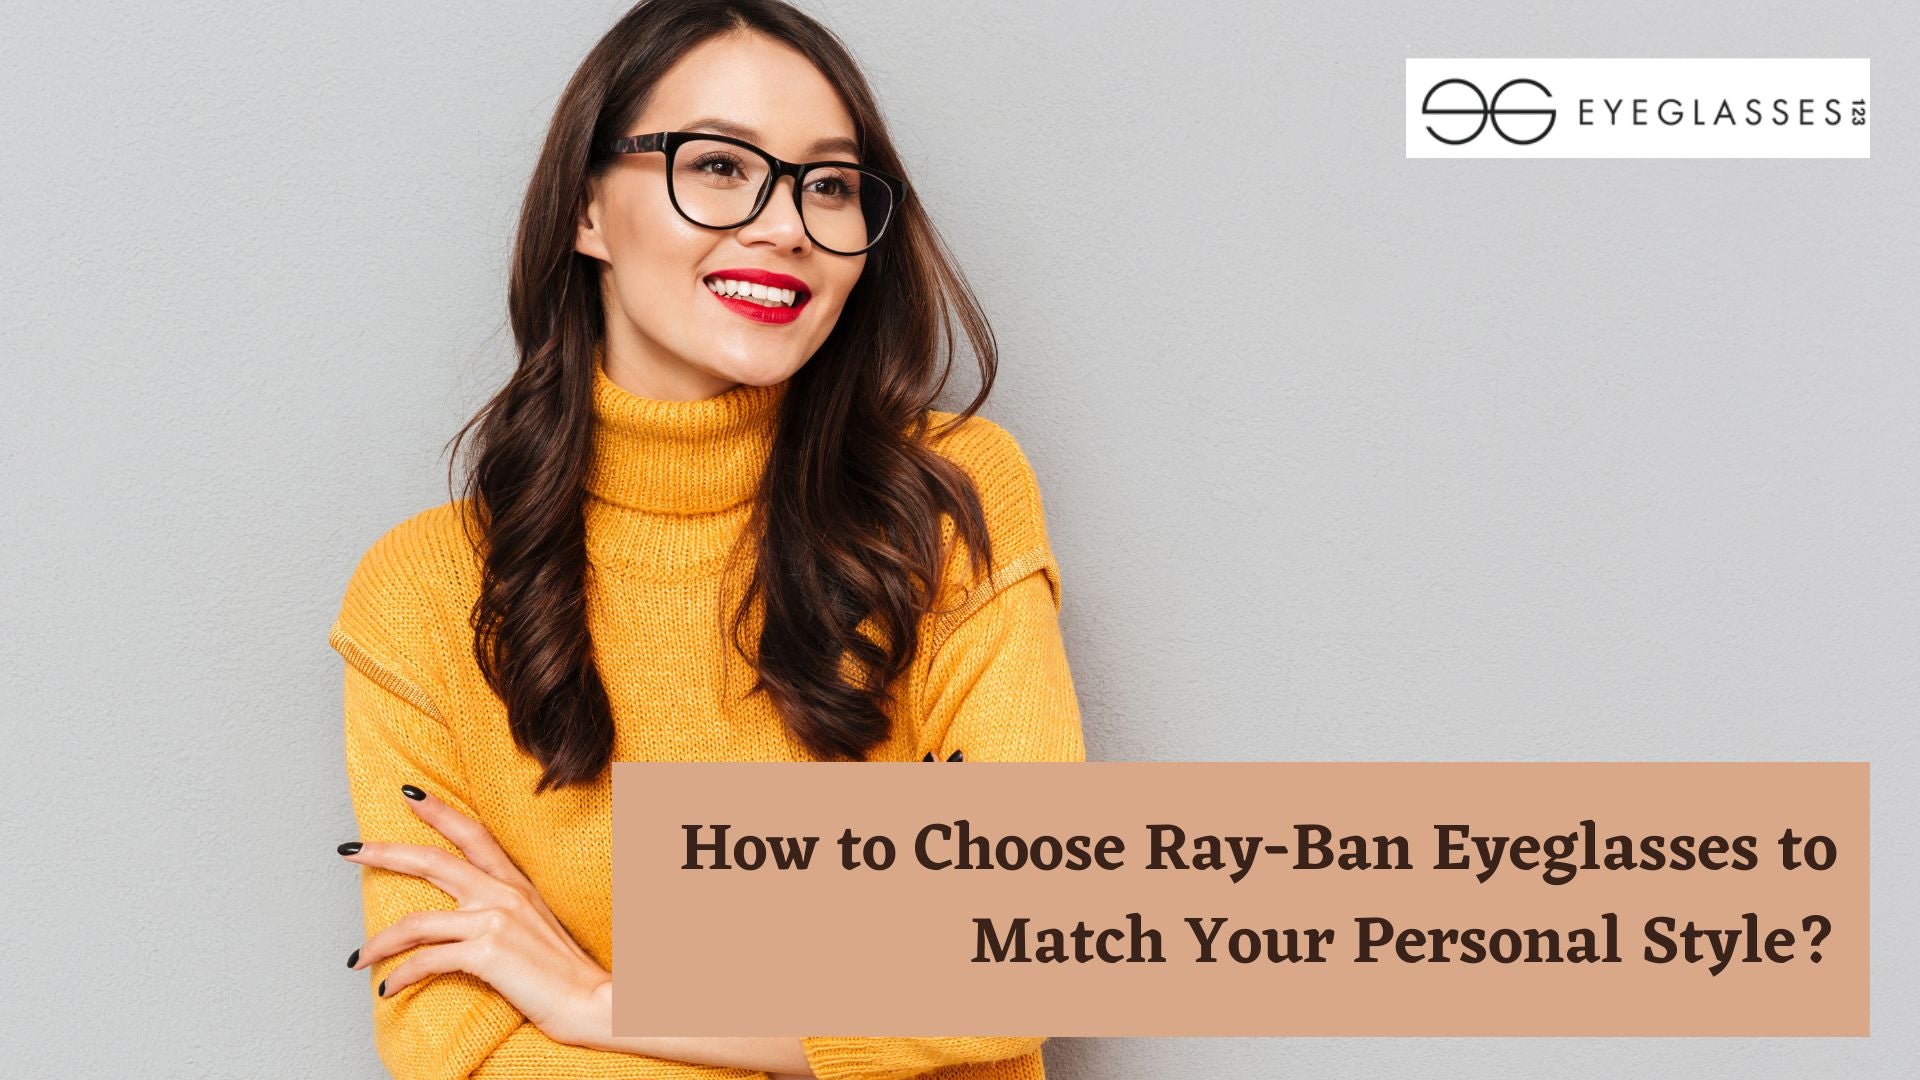 How to Choose Ray-Ban Eyeglasses to Match Your Personal Style?